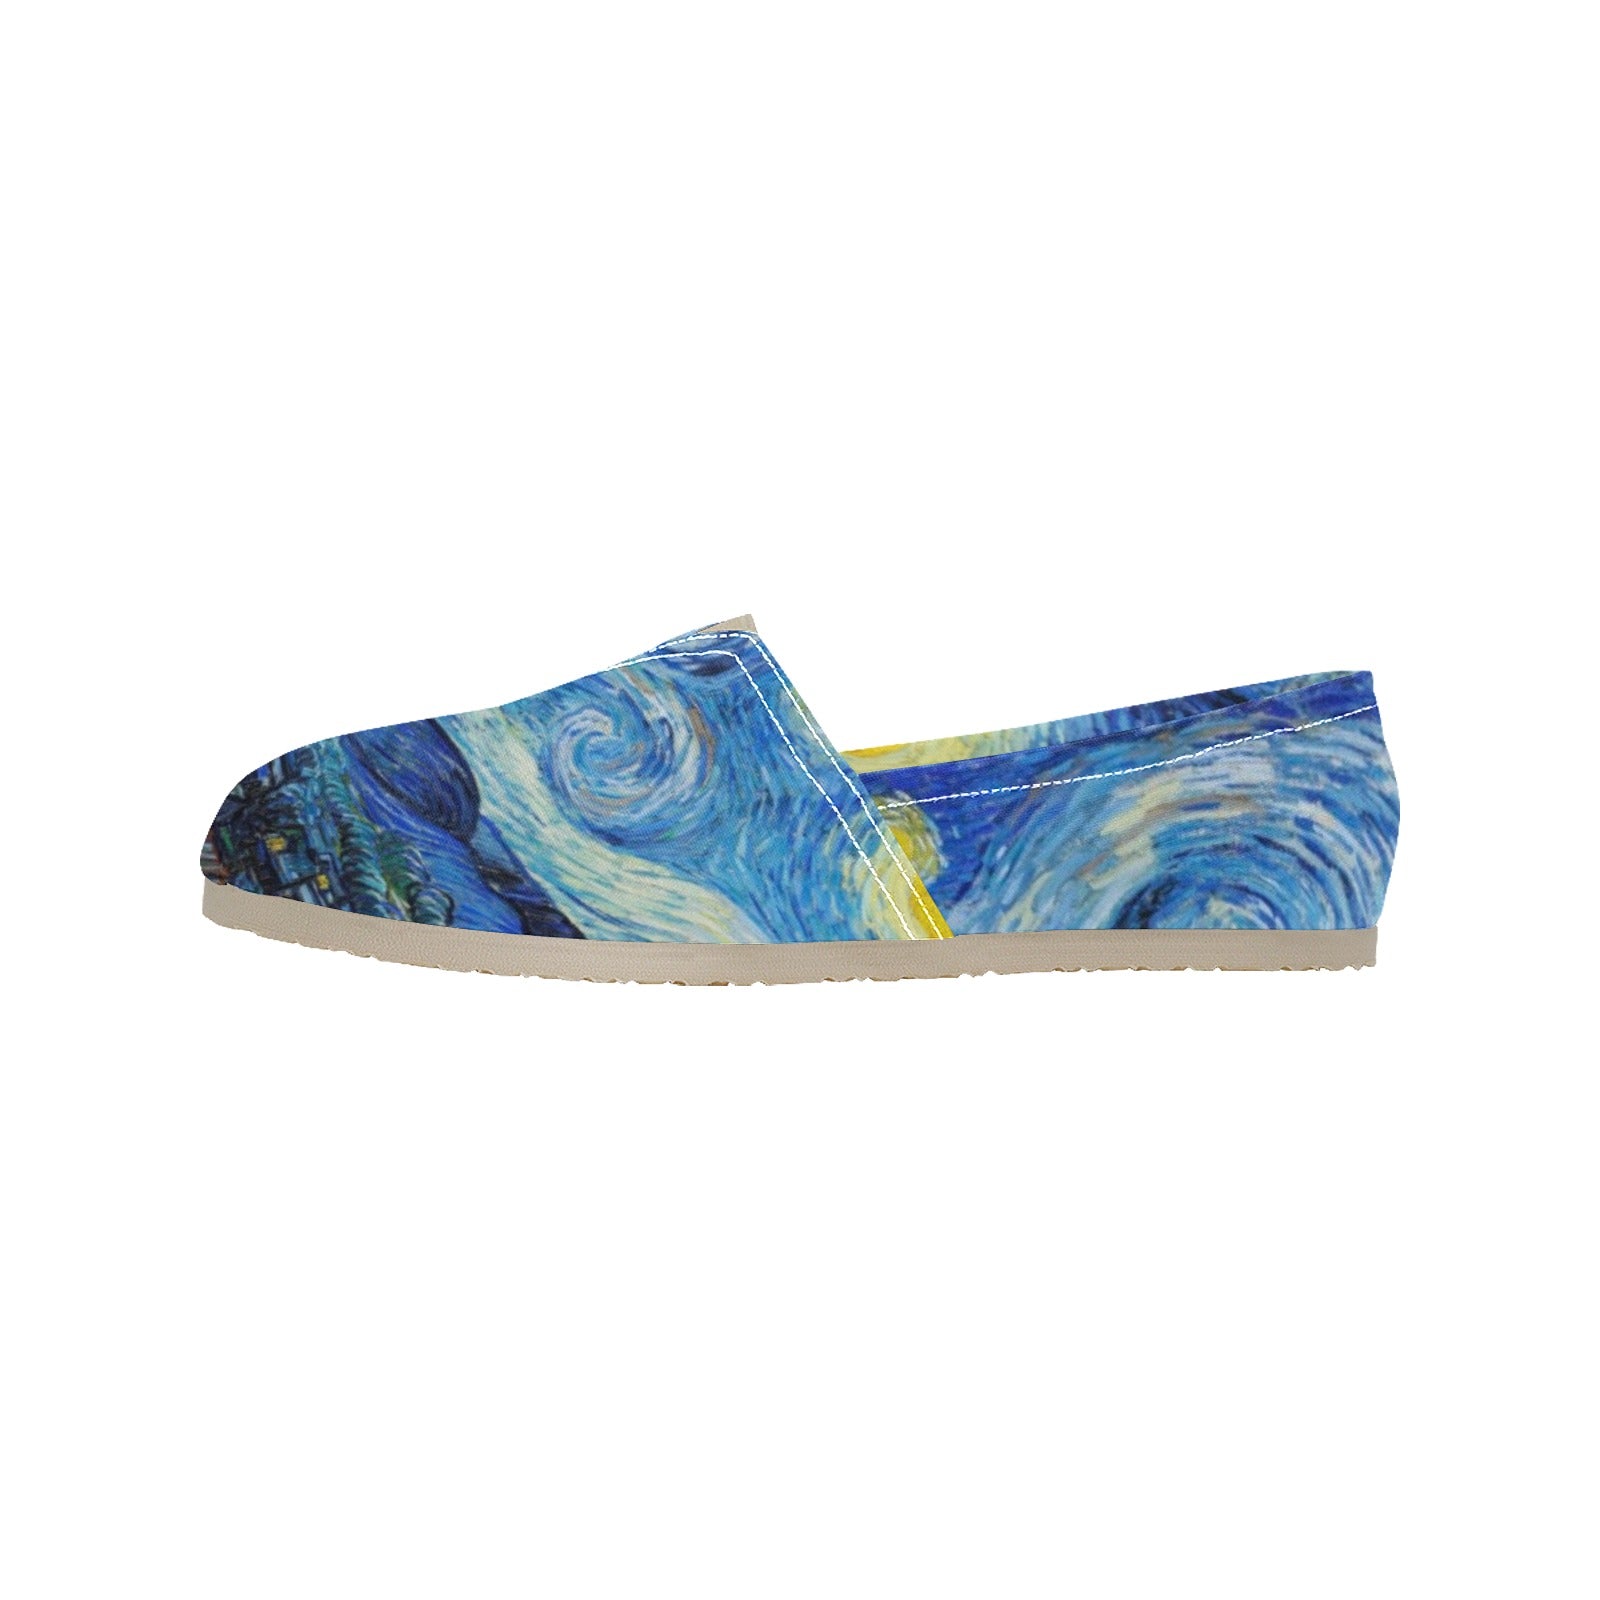 Starry - Casual Canvas Slip-on Shoes